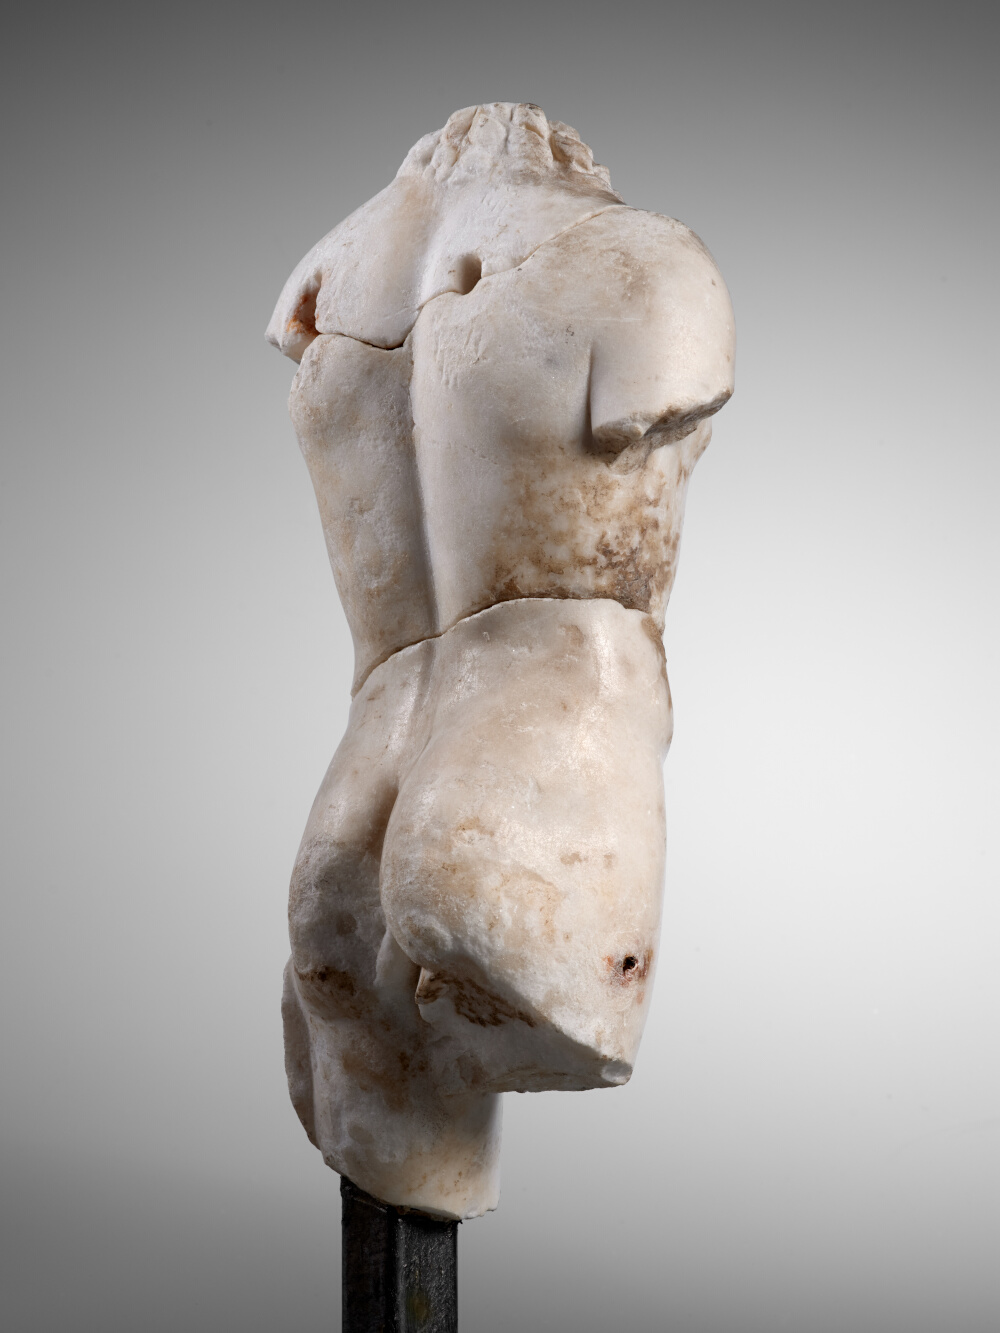 Statuette in the manner of the Eros of Centocelle